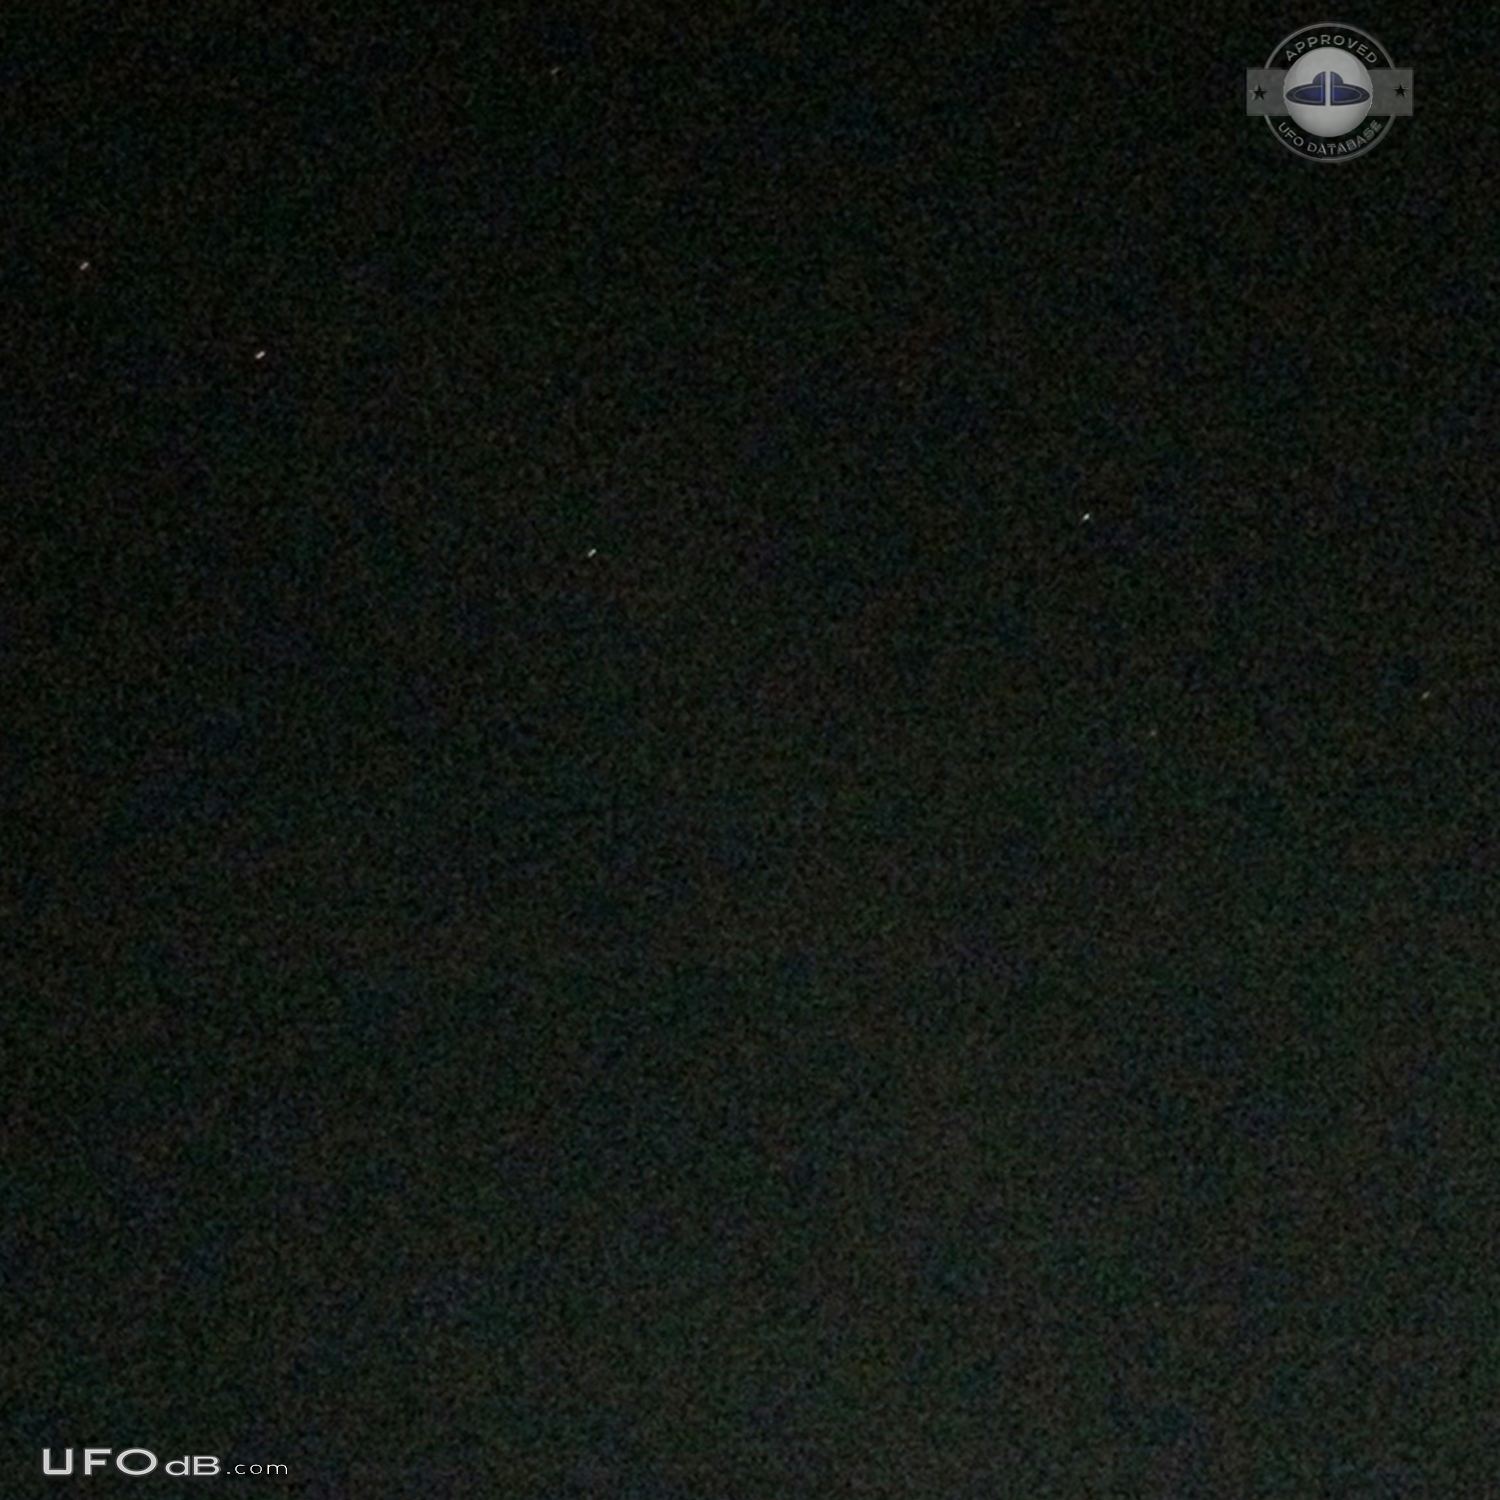 7 red star like UFO ascended above cloud - Cambodia 2015 UFO Picture #676-6